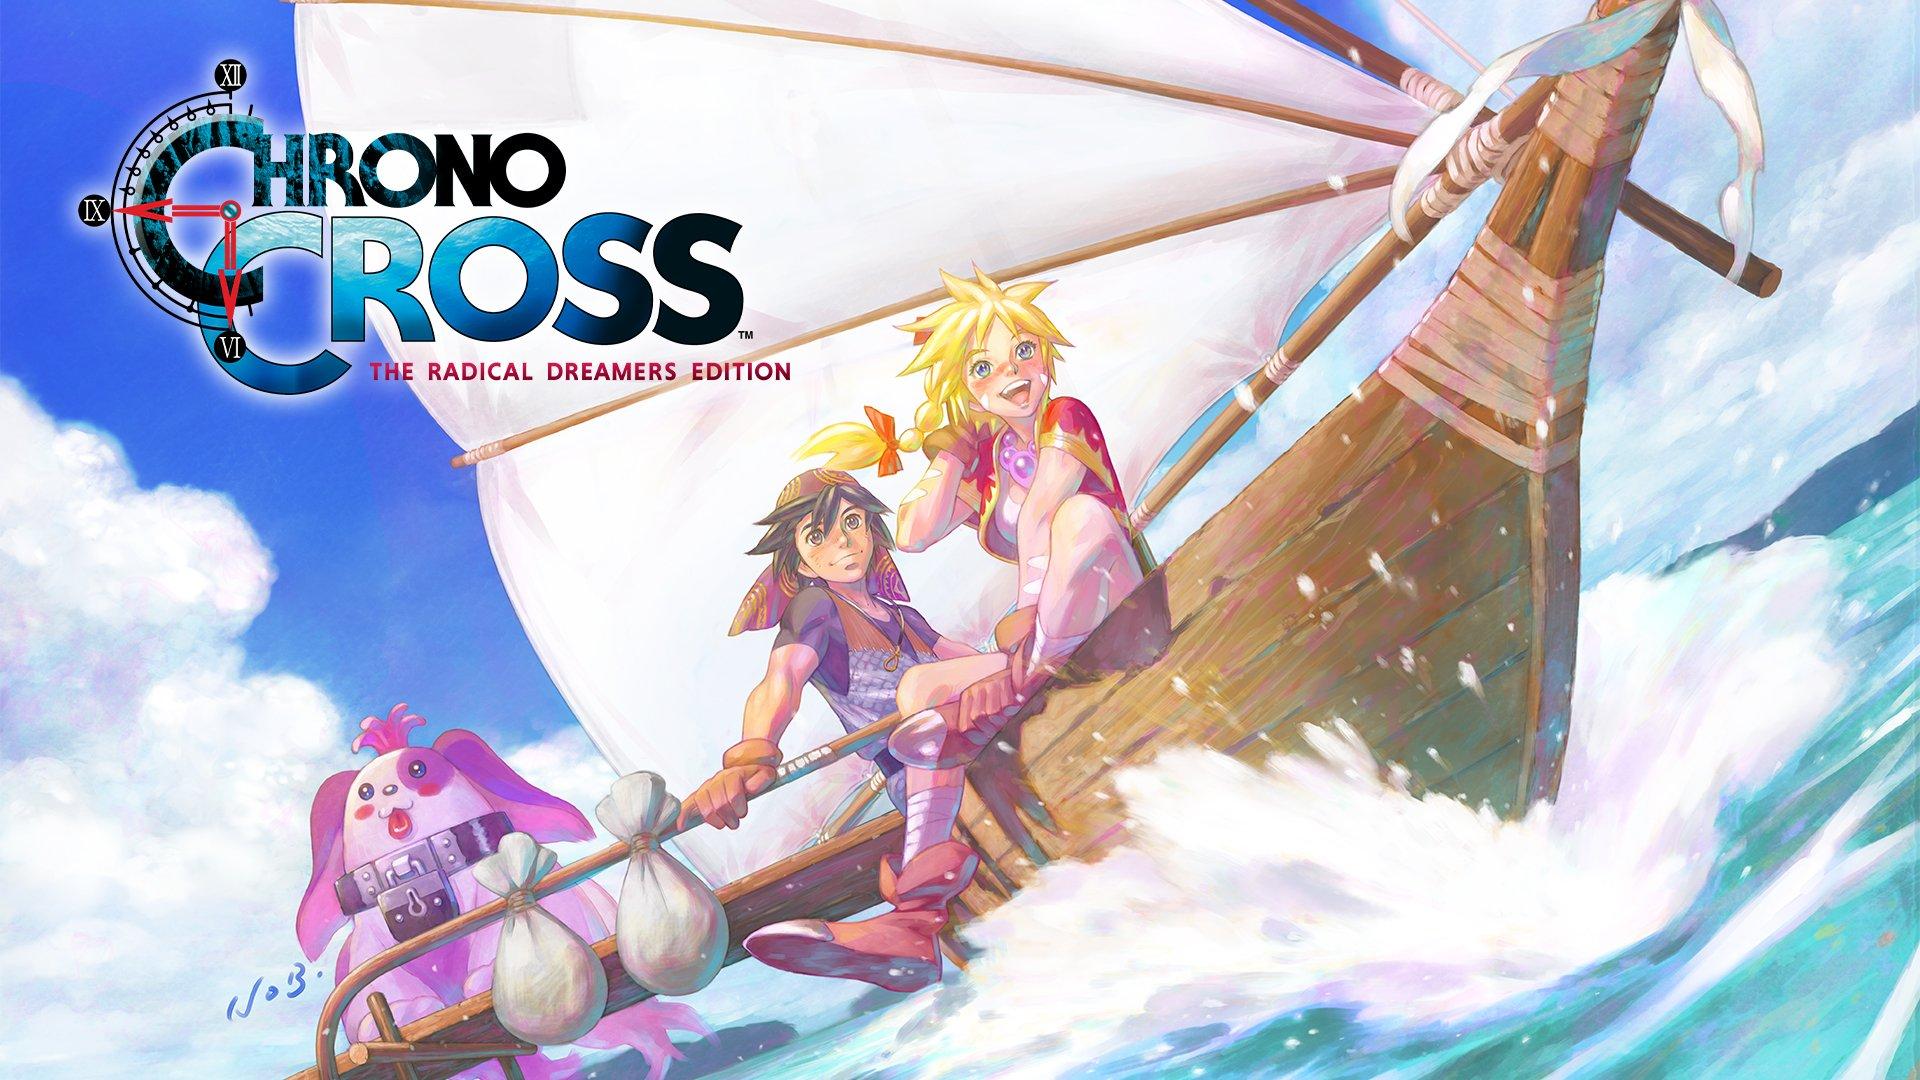 Chrono Cross The Radical Dreamers Edition Switch M. Fisica